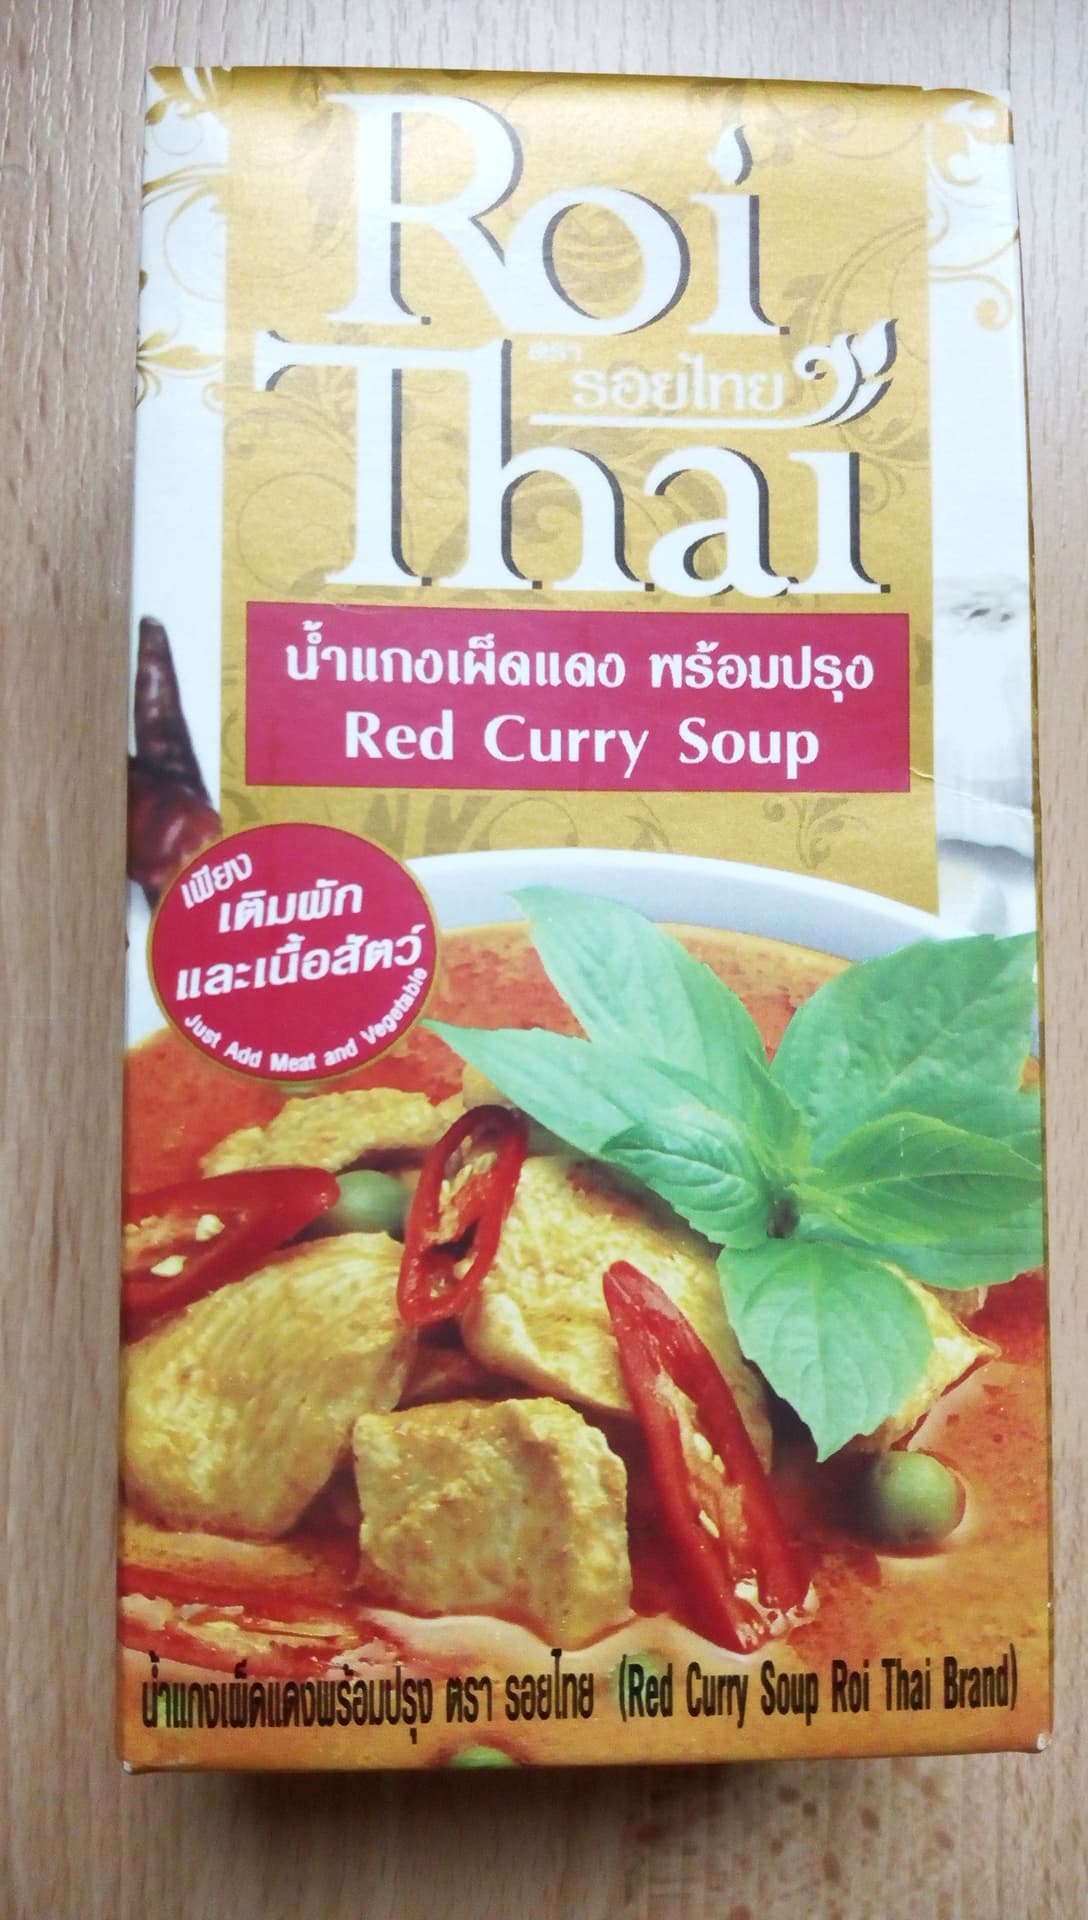 Thaicurry front